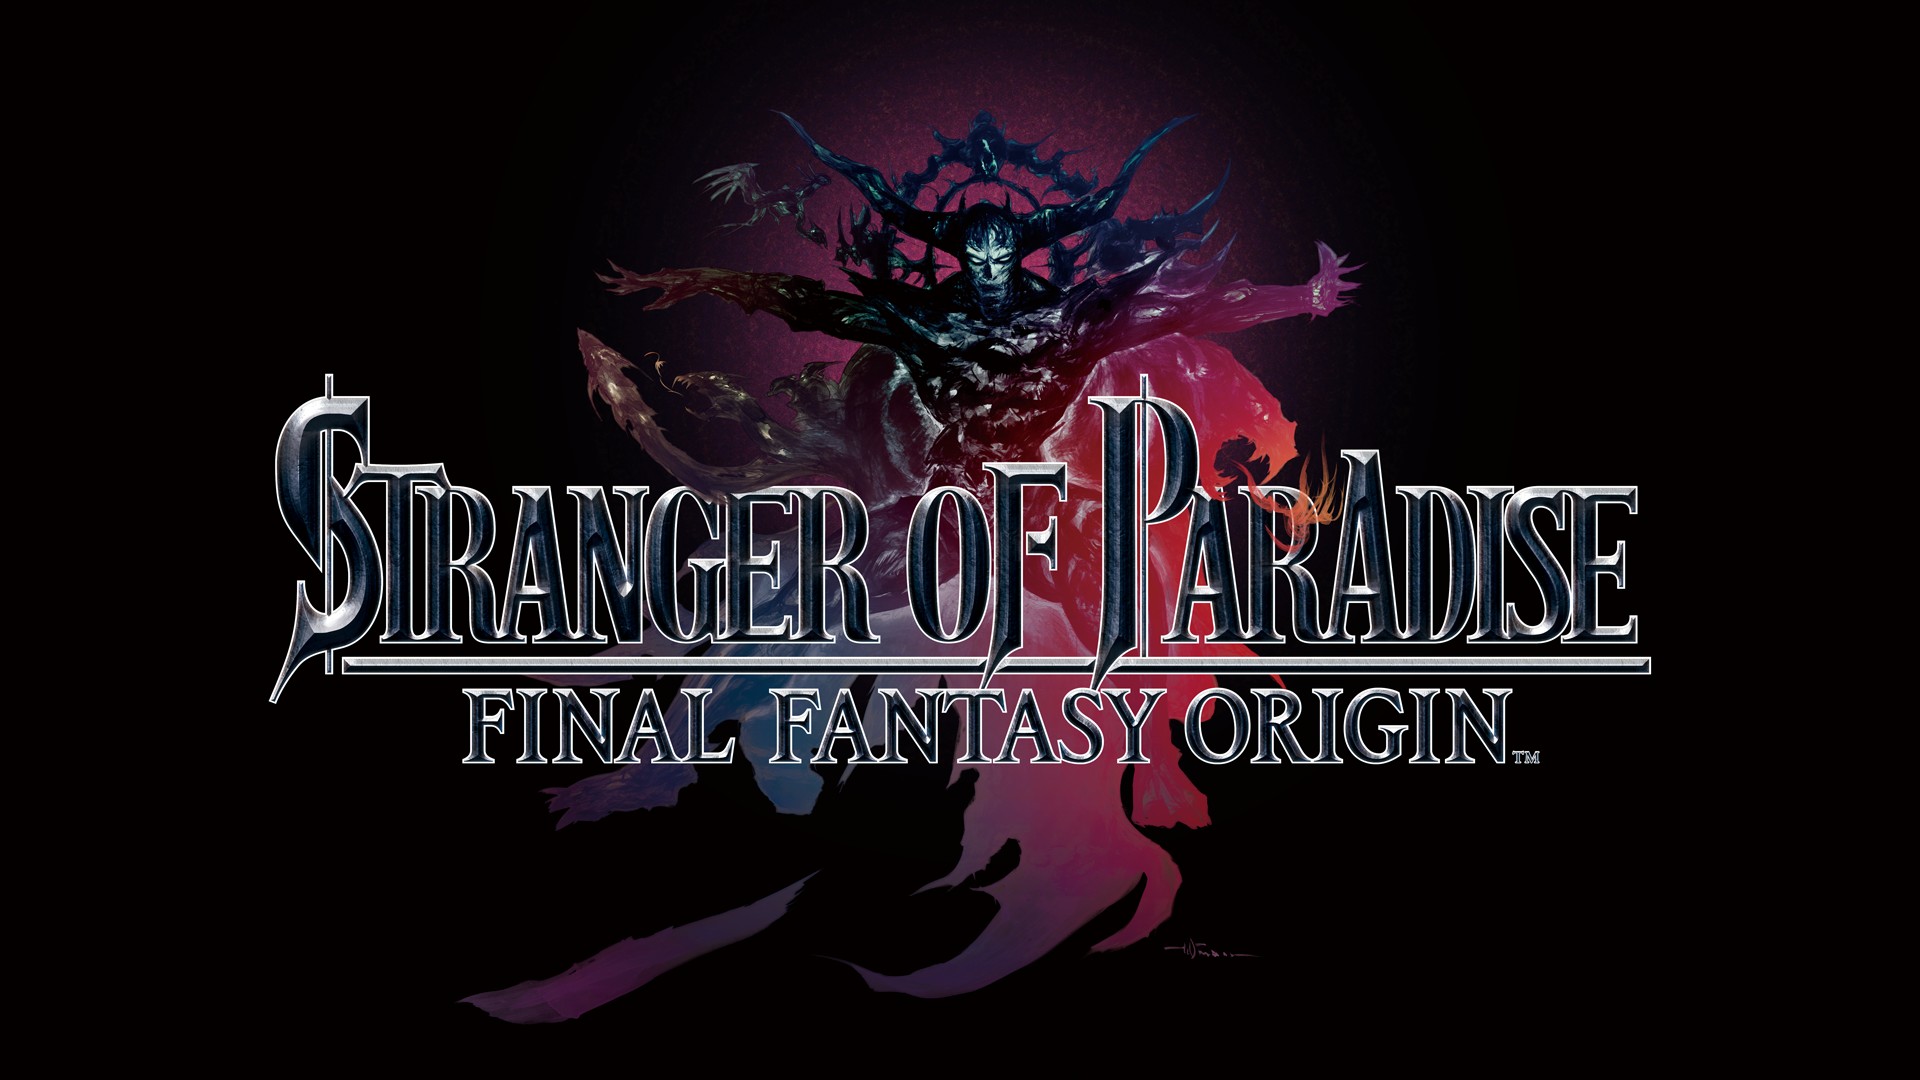 Video For Stranger of Paradise Final Fantasy Origin Trial Version and Release Date Revealed